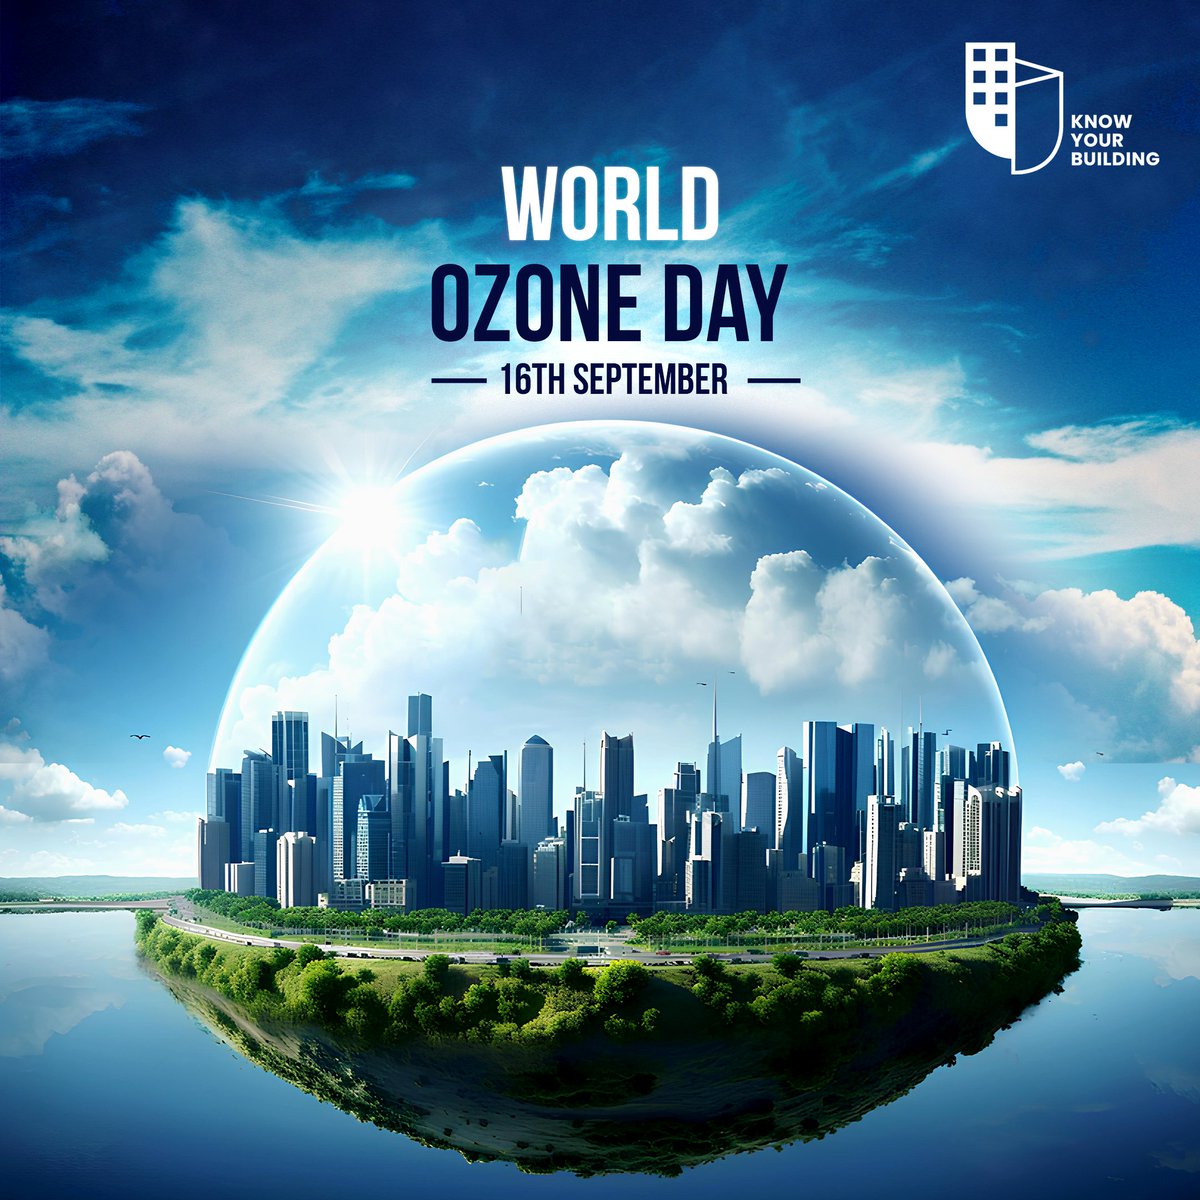 Let's celebrate World Ozone Day by getting to know our buildings better, making them more efficient, and contributing to a healthier planet. 🌏💚

Join the revolution in building management! 🏗️🔐

#KnowYourBuilding #WirelessBMS #Sustainability #WorldOzoneDay #SmartBuildings